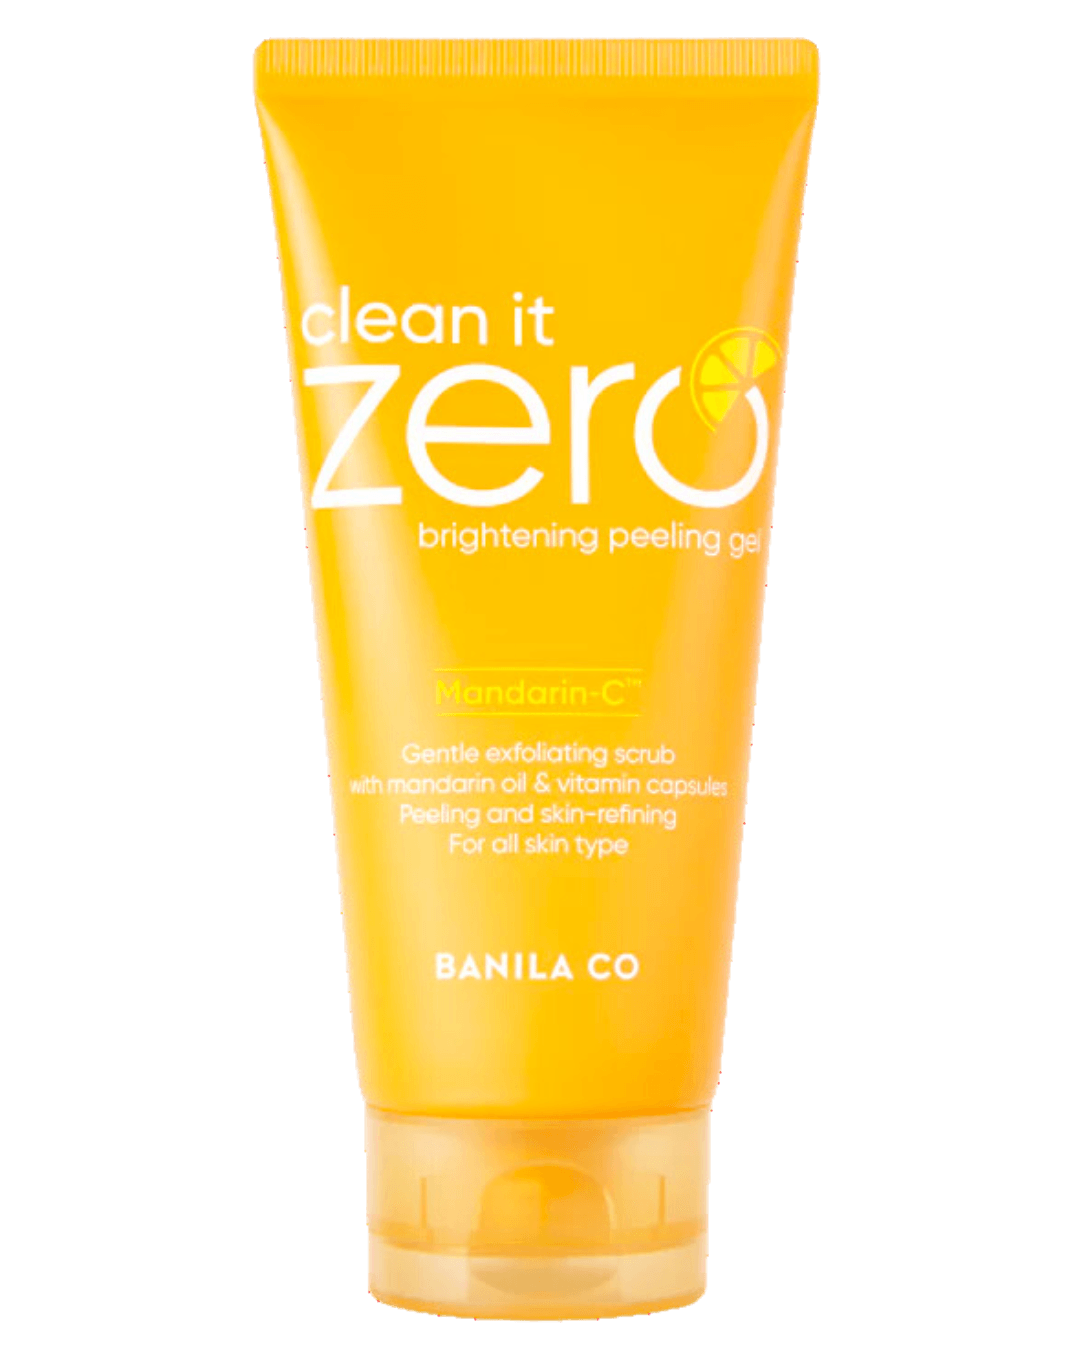 Daily Vanity Beauty Awards 2024 Best Skincare Banila Co Clean it Zero Brightening Peeling Gel Voted By Beauty Experts